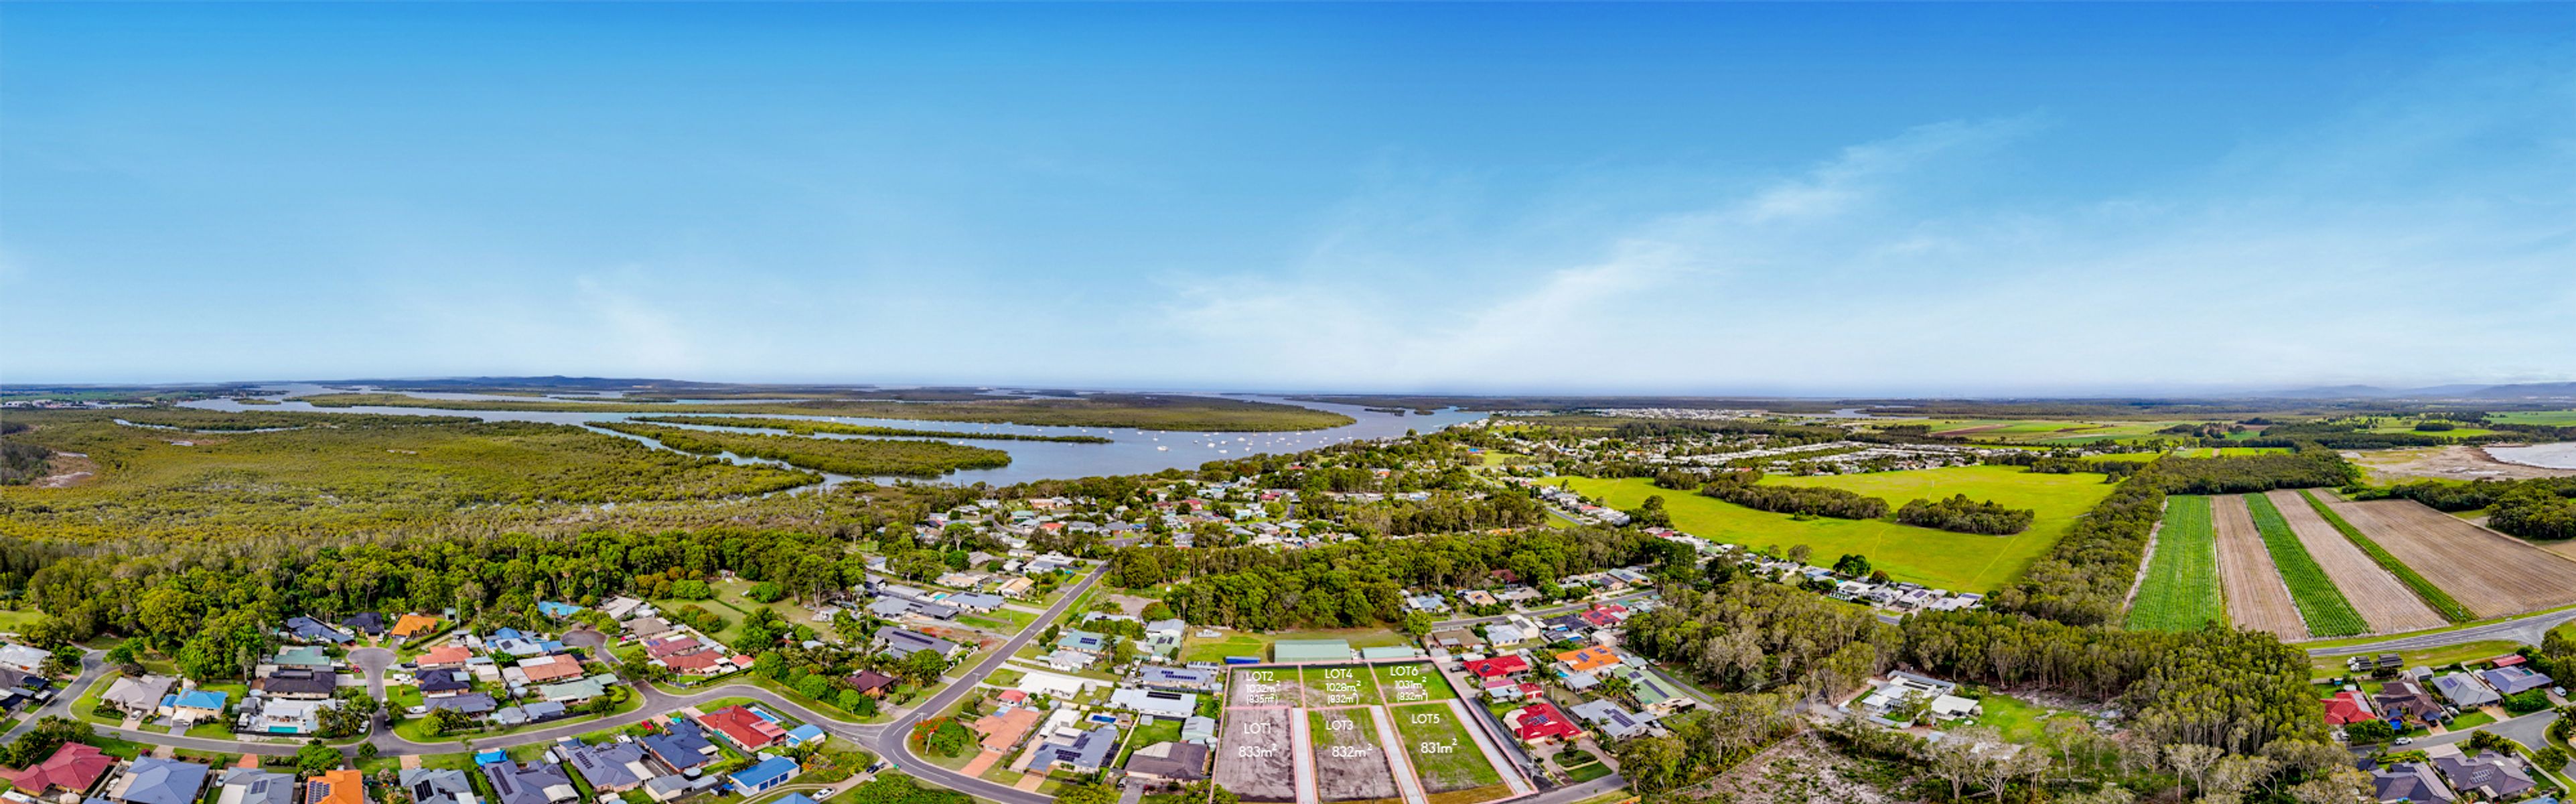 Drone panorama without pins